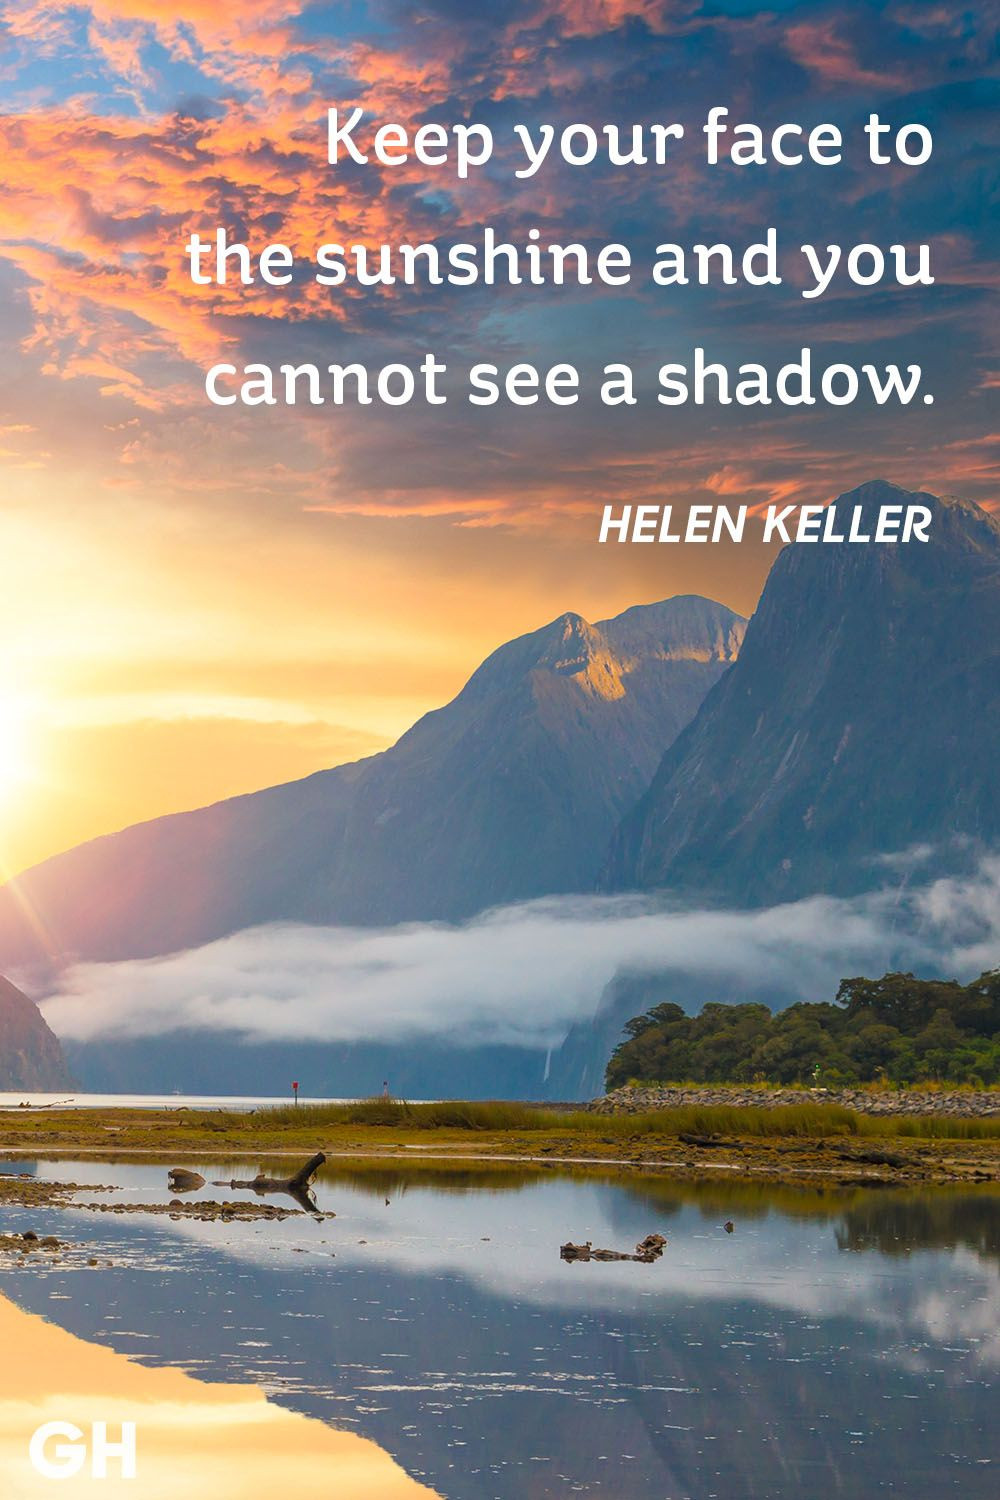 Images Of Inspirational Quotes
 Inspirational Quotes Helen Keller – AtoZMom s Blog